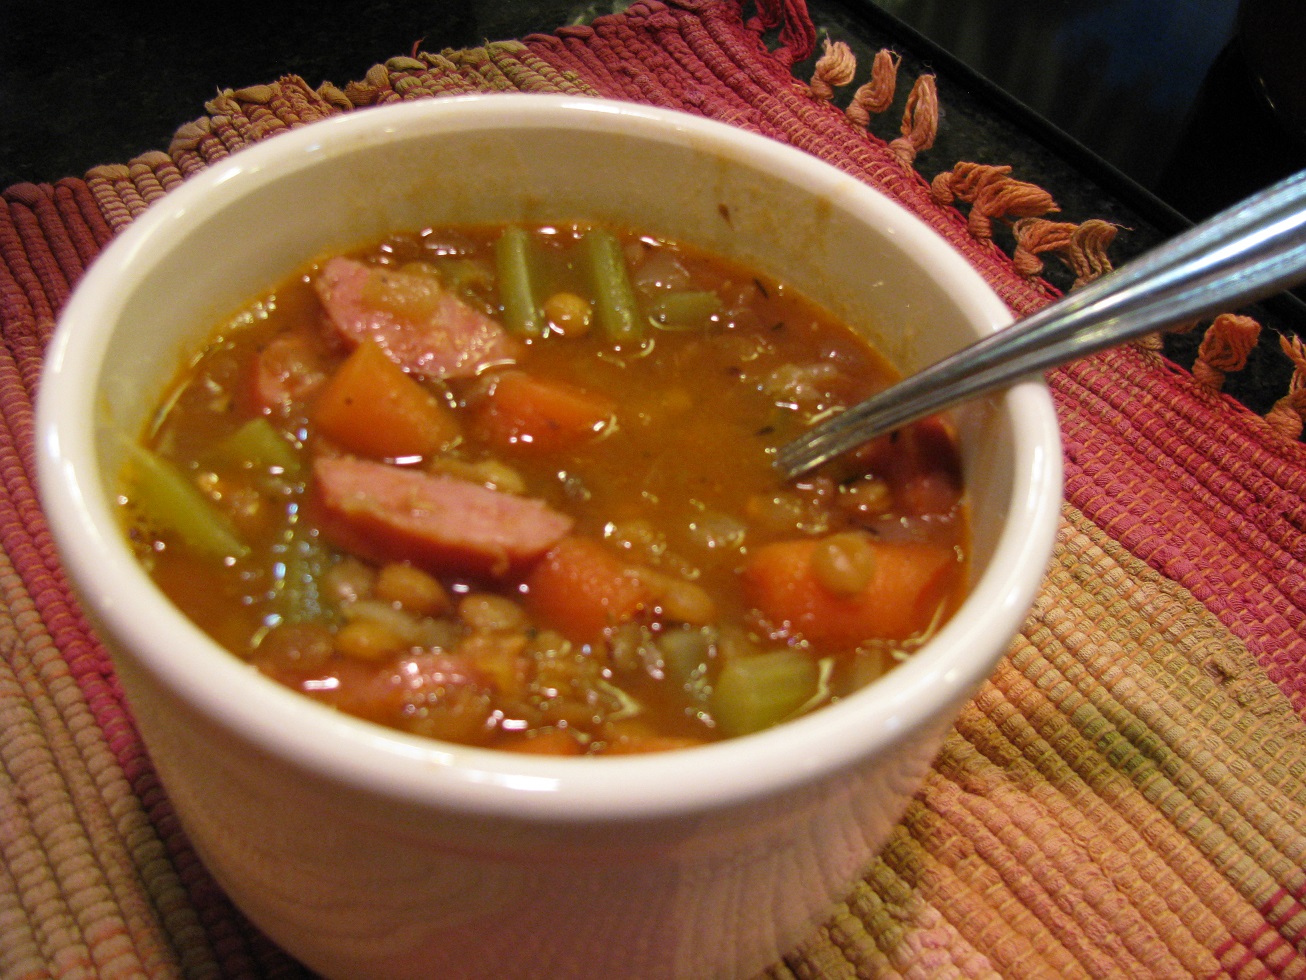 As researchers have shown, we all could benefit from eating more soup.